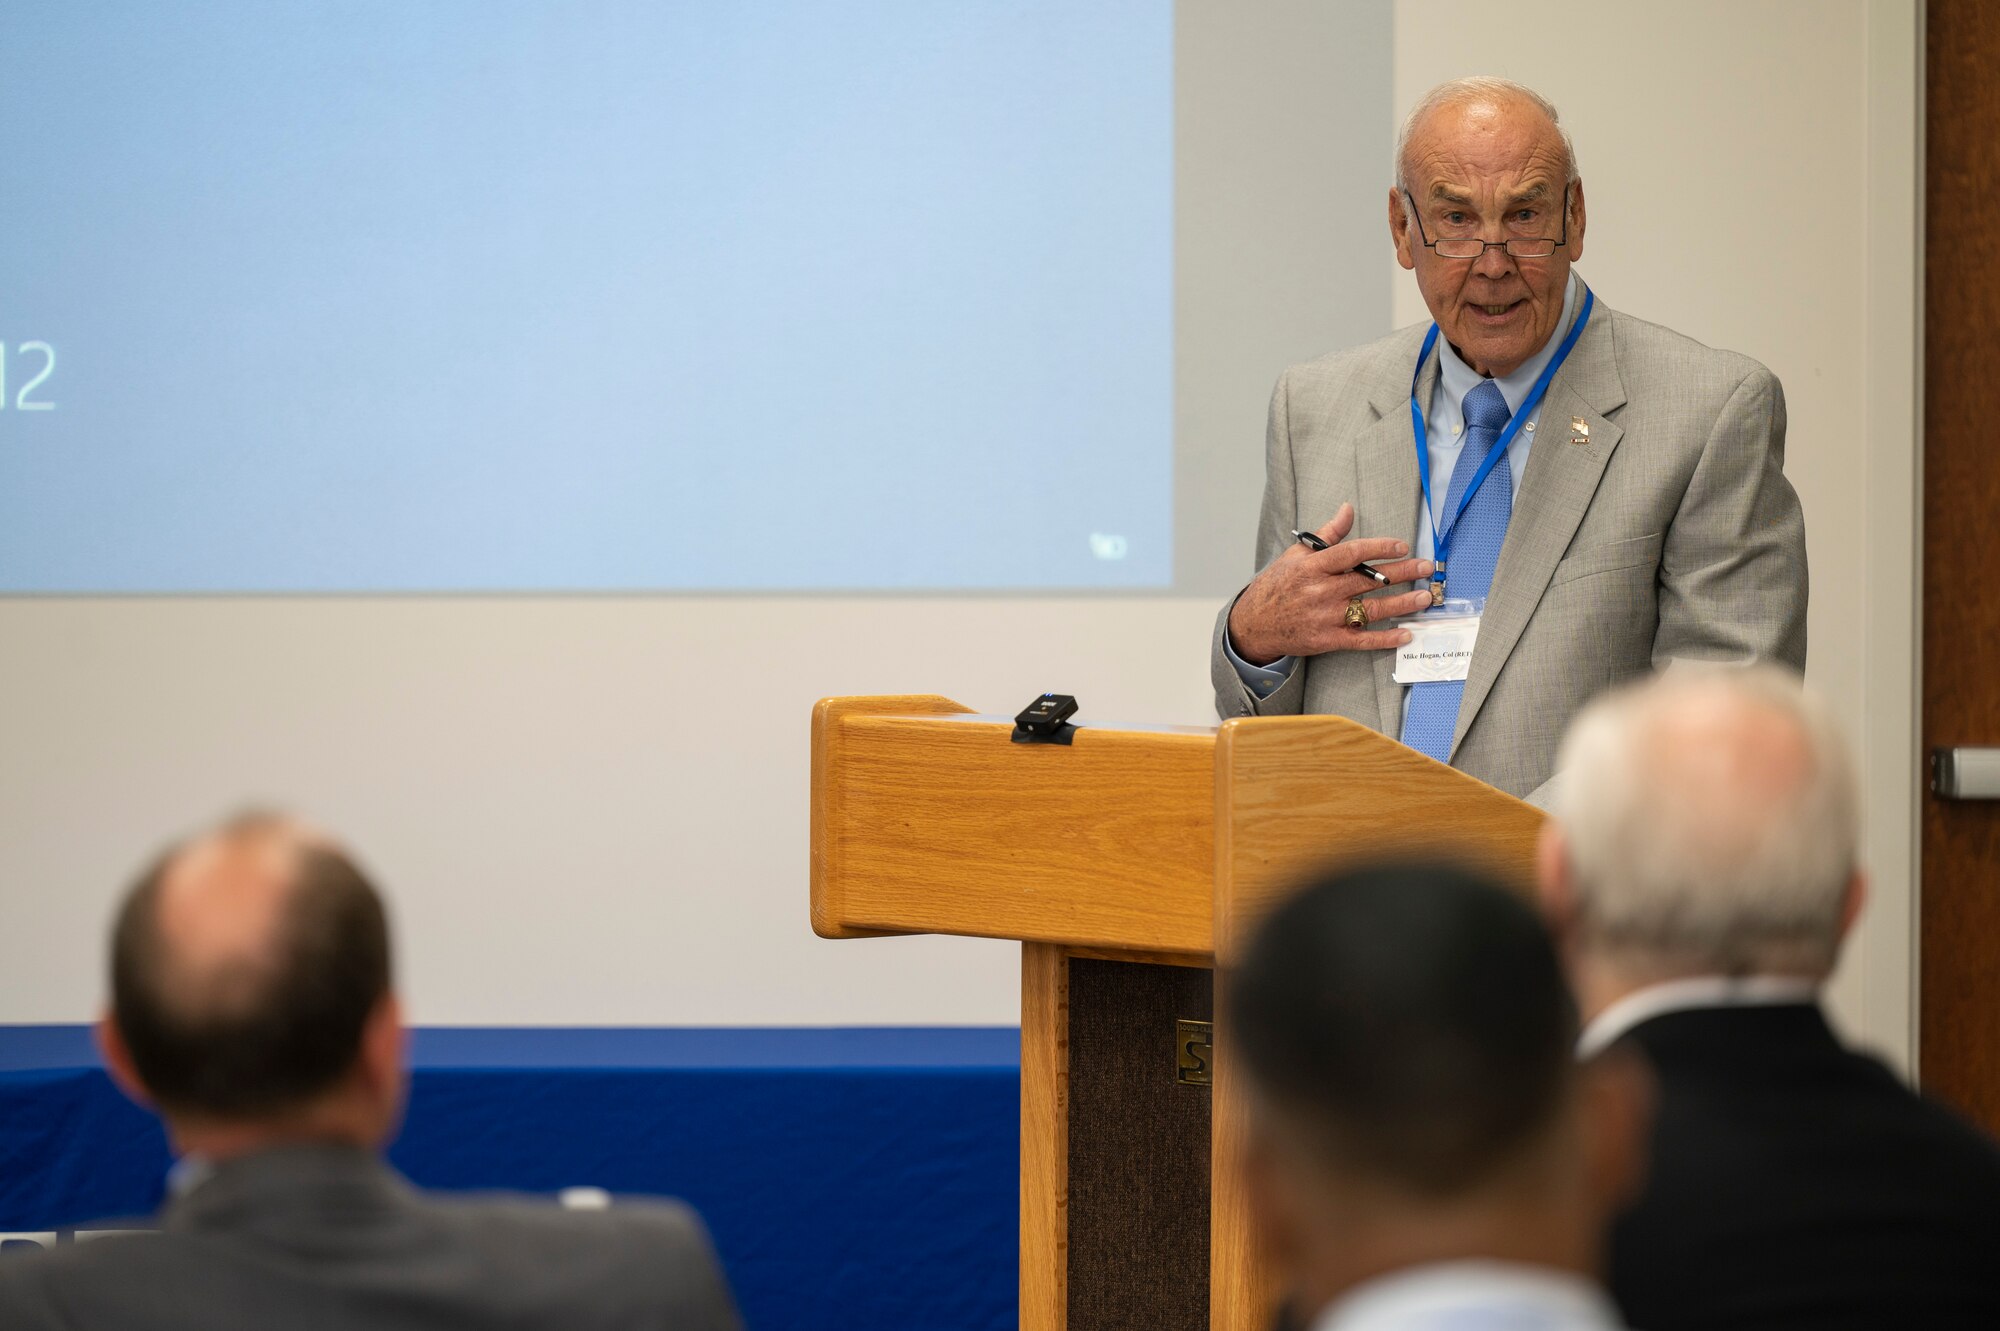 Retired U.S. Air Force Col. Mike Hogan, former Air Force Metrology and Calibration Program director, speaks during a commemoration ceremony at the Air Force Primary Standards Lab at Heath, Ohio Sept. 12, 2022.